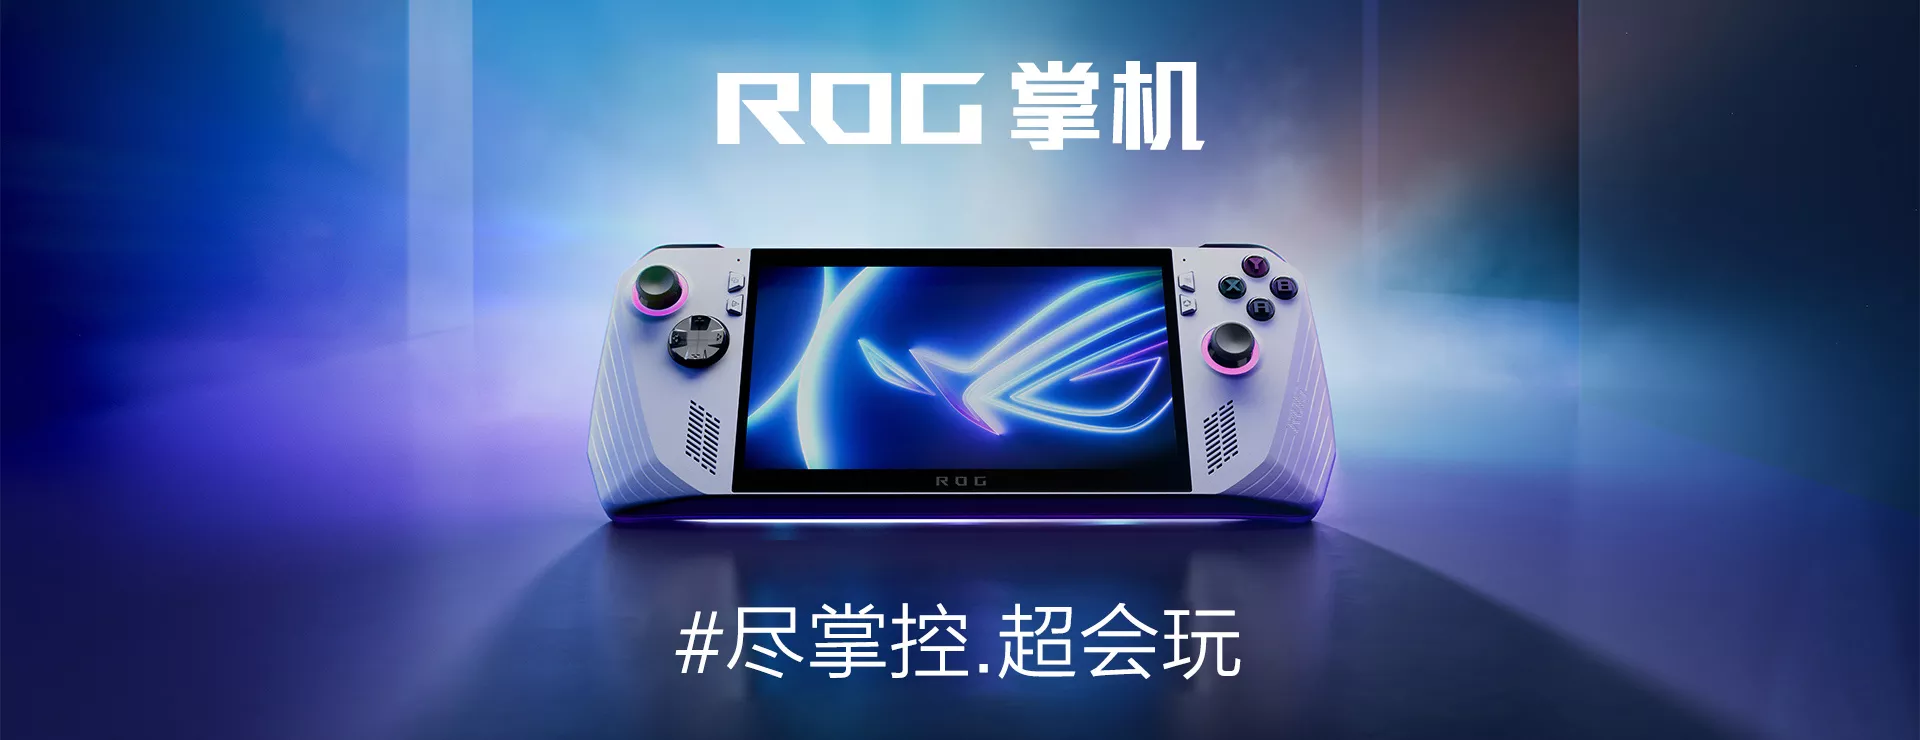 ROG Ally on the ground with a light blue background, and the words “ROG Ally. #playALLYourgames” captioned beside it.